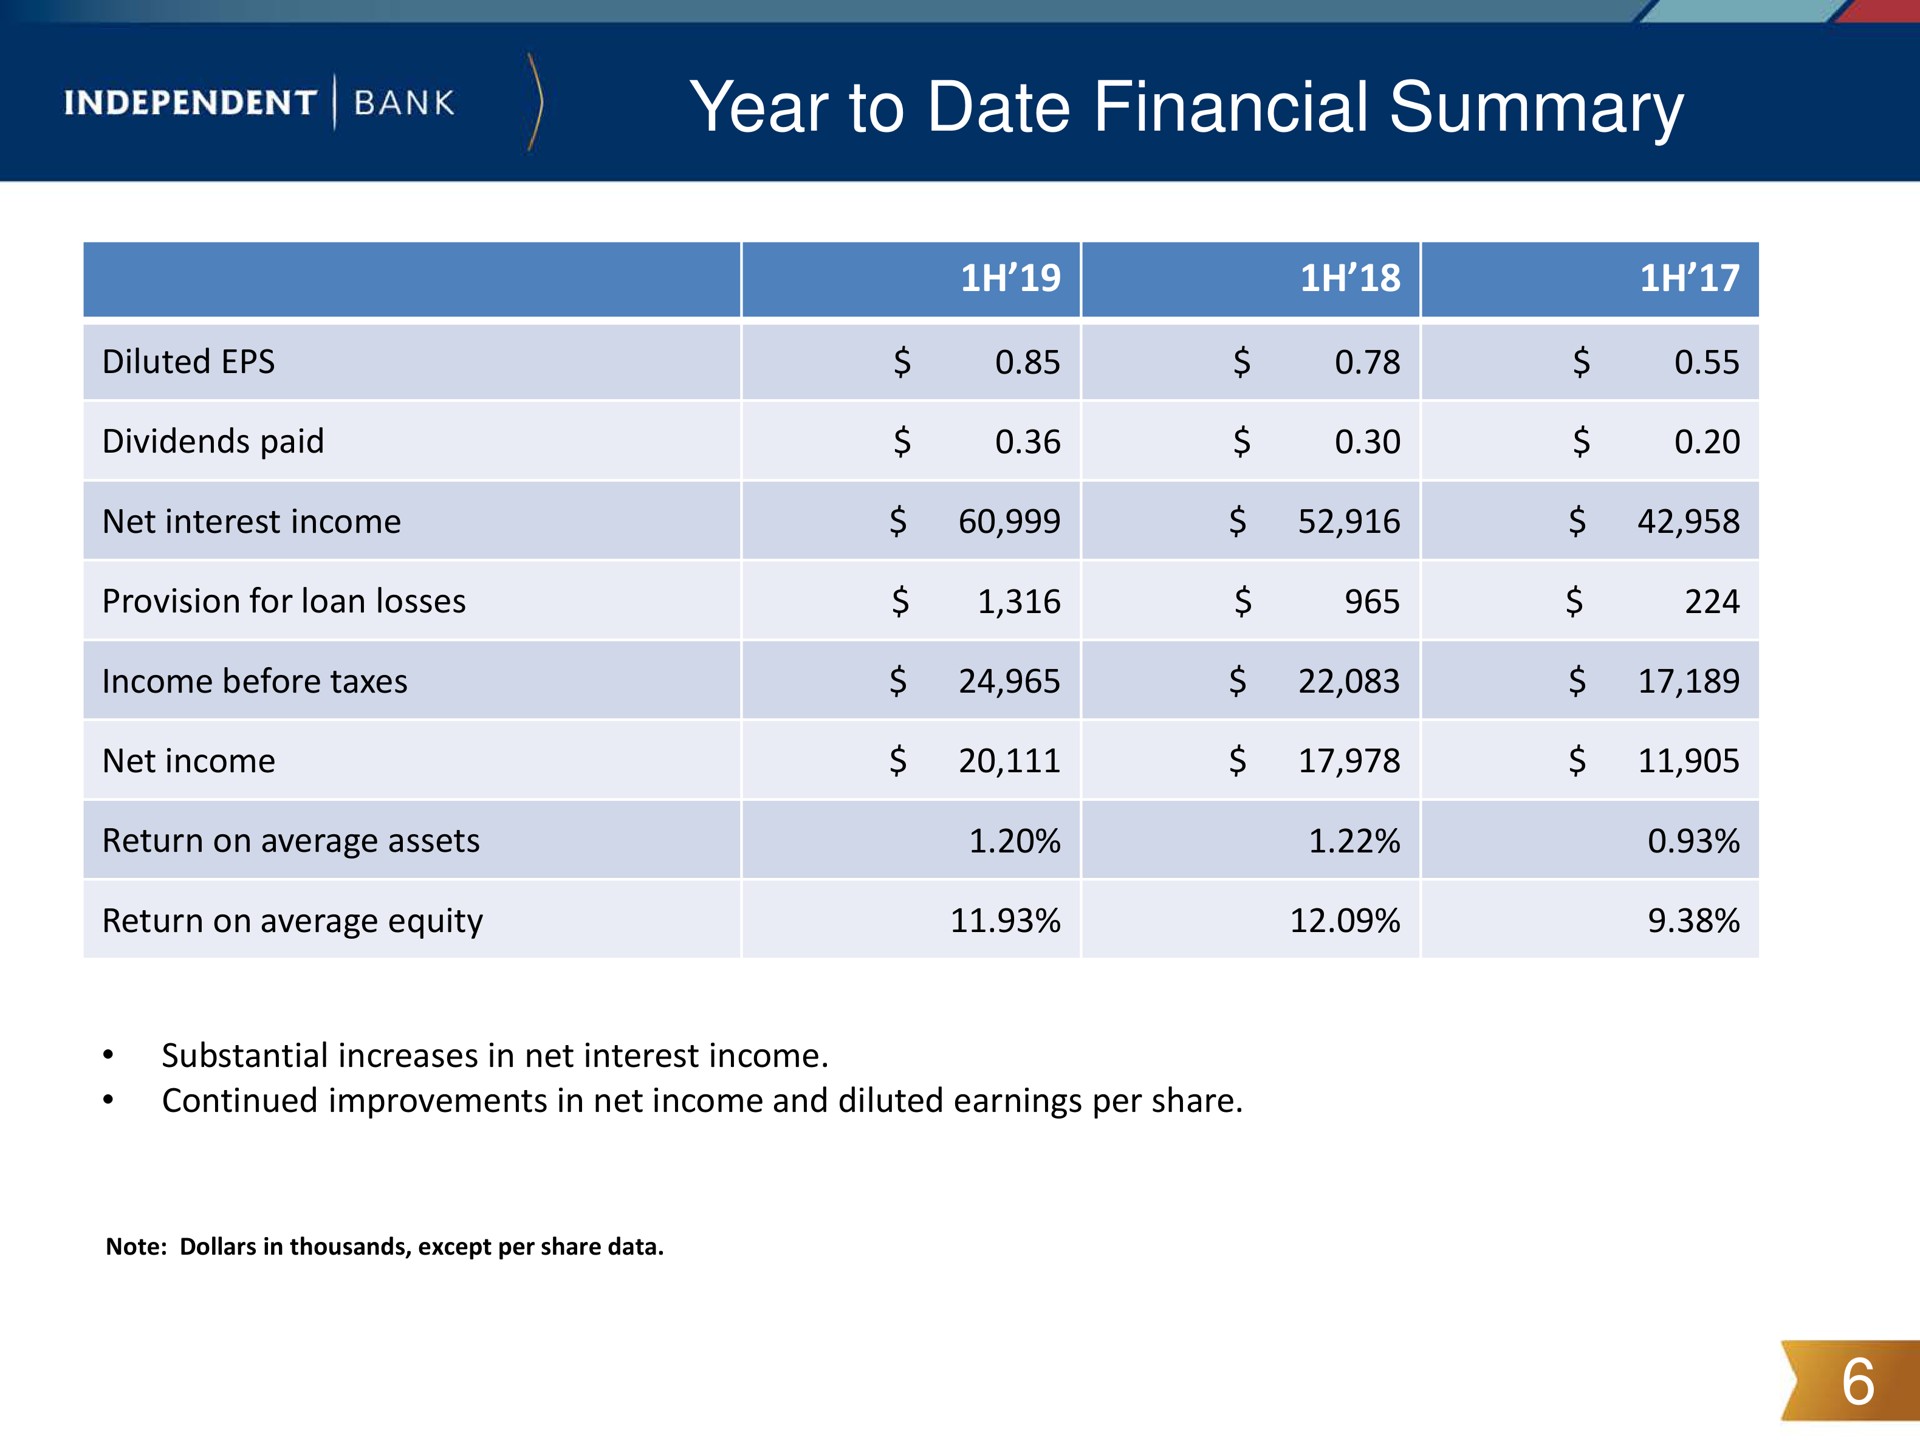 year to date financial summary | Independent Bank Corp